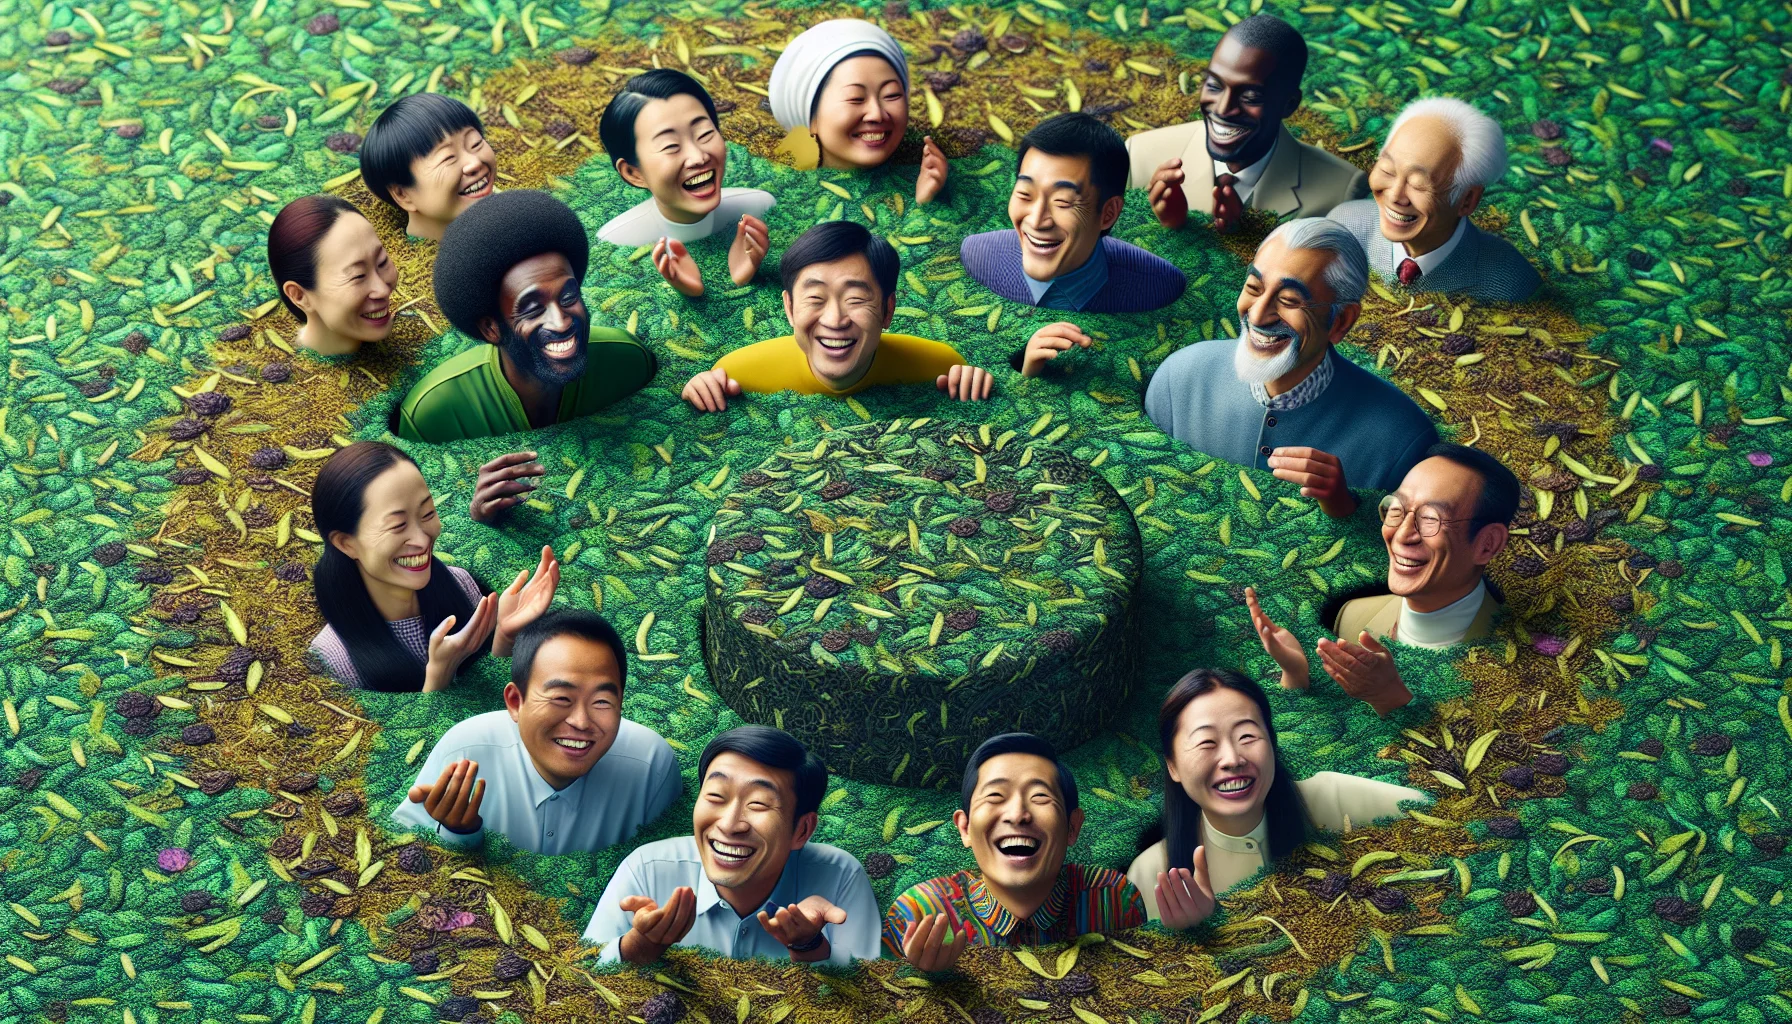 Create a vivid image showing a peculiar scene. Picture an unconventional mattress made entirely from green tea leaves. The mattress exudes a refreshing aroma that is attracting a diverse group of people towards it. There are Caucasian, Black, Asian and Hispanic individuals, of both genders, all smiling broadly, drawn irresistibly to the mattress. Some are attempting to dive into it, while others are gently resting their hands on it, savouring its unusual texture. The scenario is depicted in an amusing, humorous way that highlights the unique appeal of the green tea mattress.